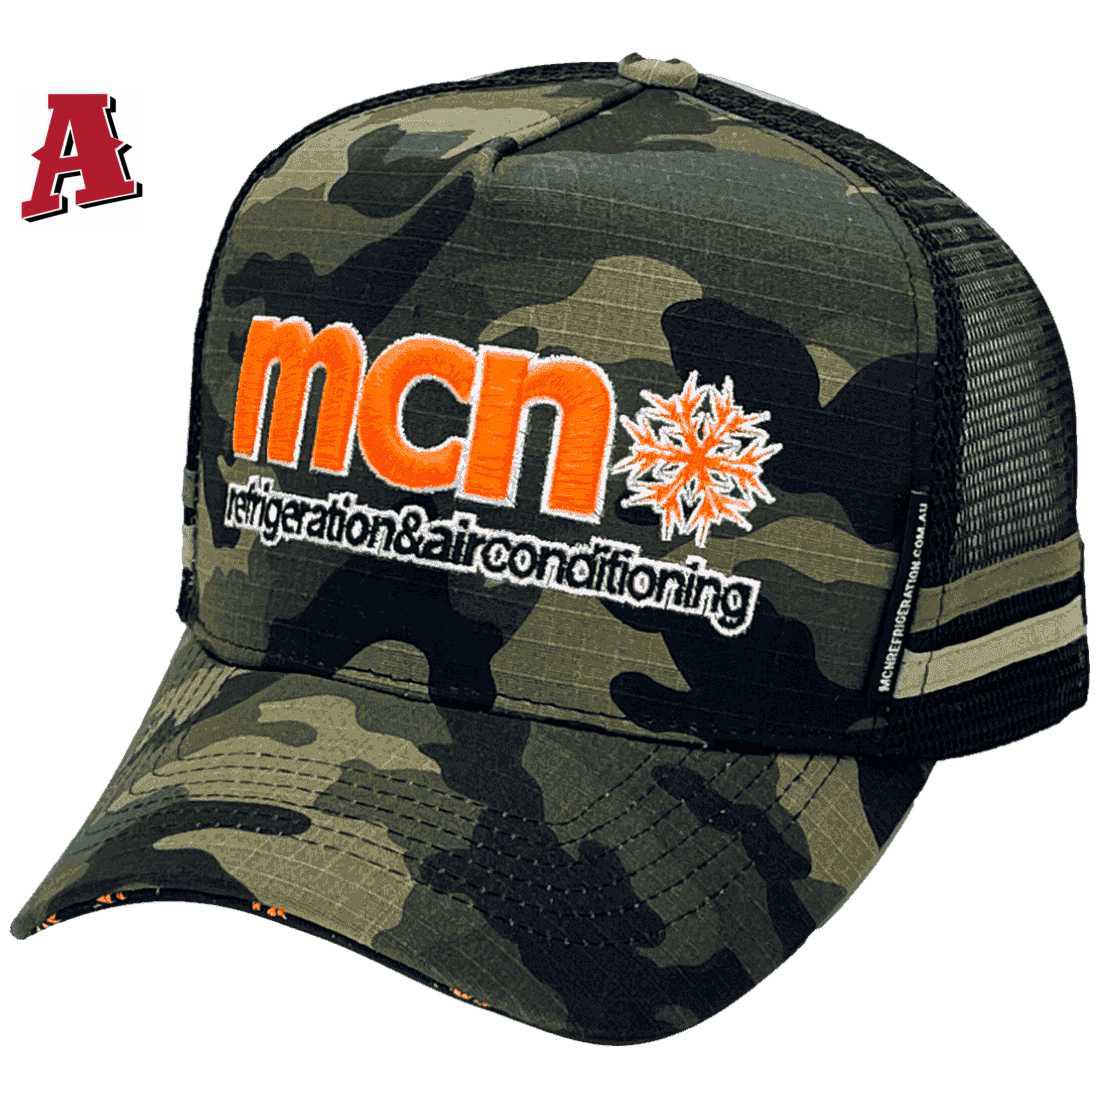 MCN Refrigeration Airconditioning Ripstop Camo Kempsey NSW HP Midrange Aussie Trucker Hat with Double Side Bands